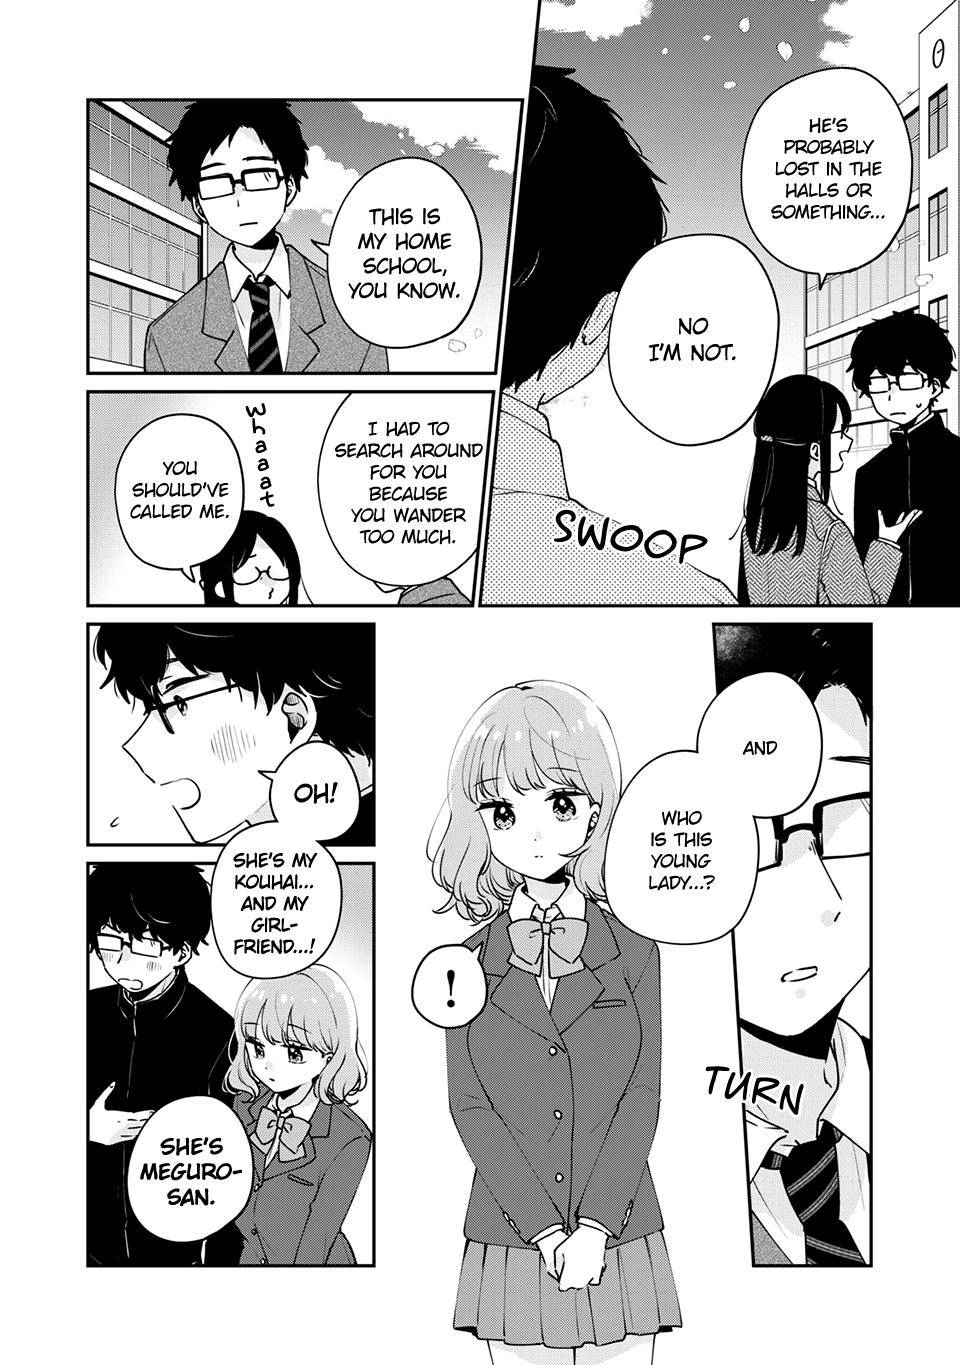 It's Not Meguro-san's First Time chapter 47 page 9